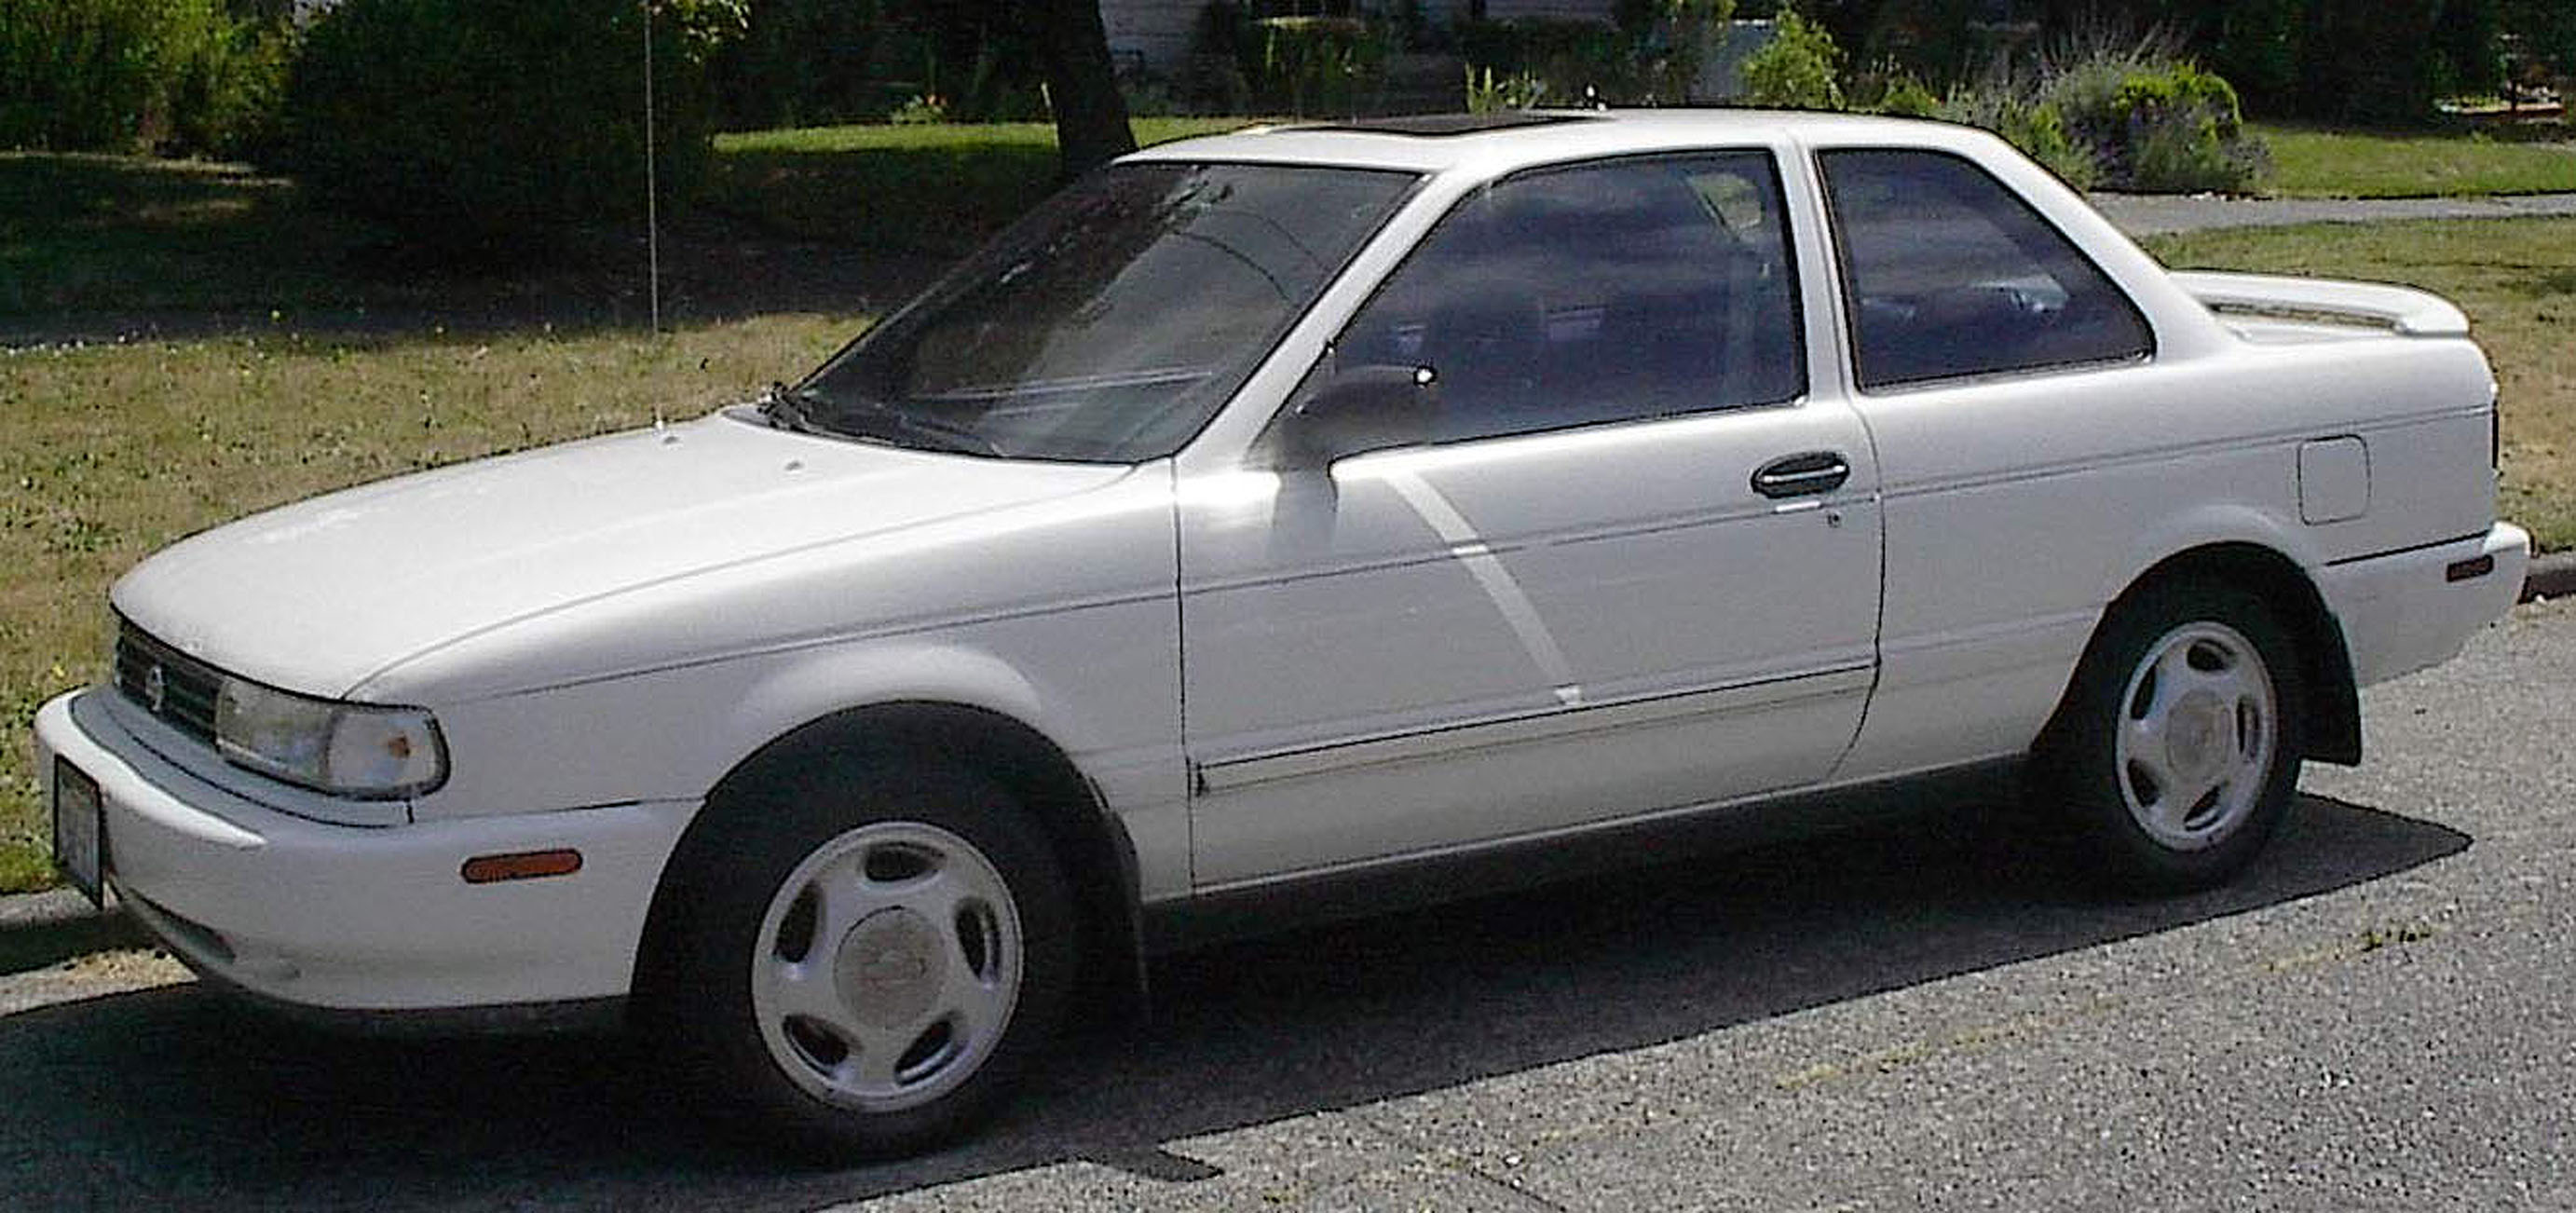 1992 Nissan Sentra - Information and photos - Neo Drive